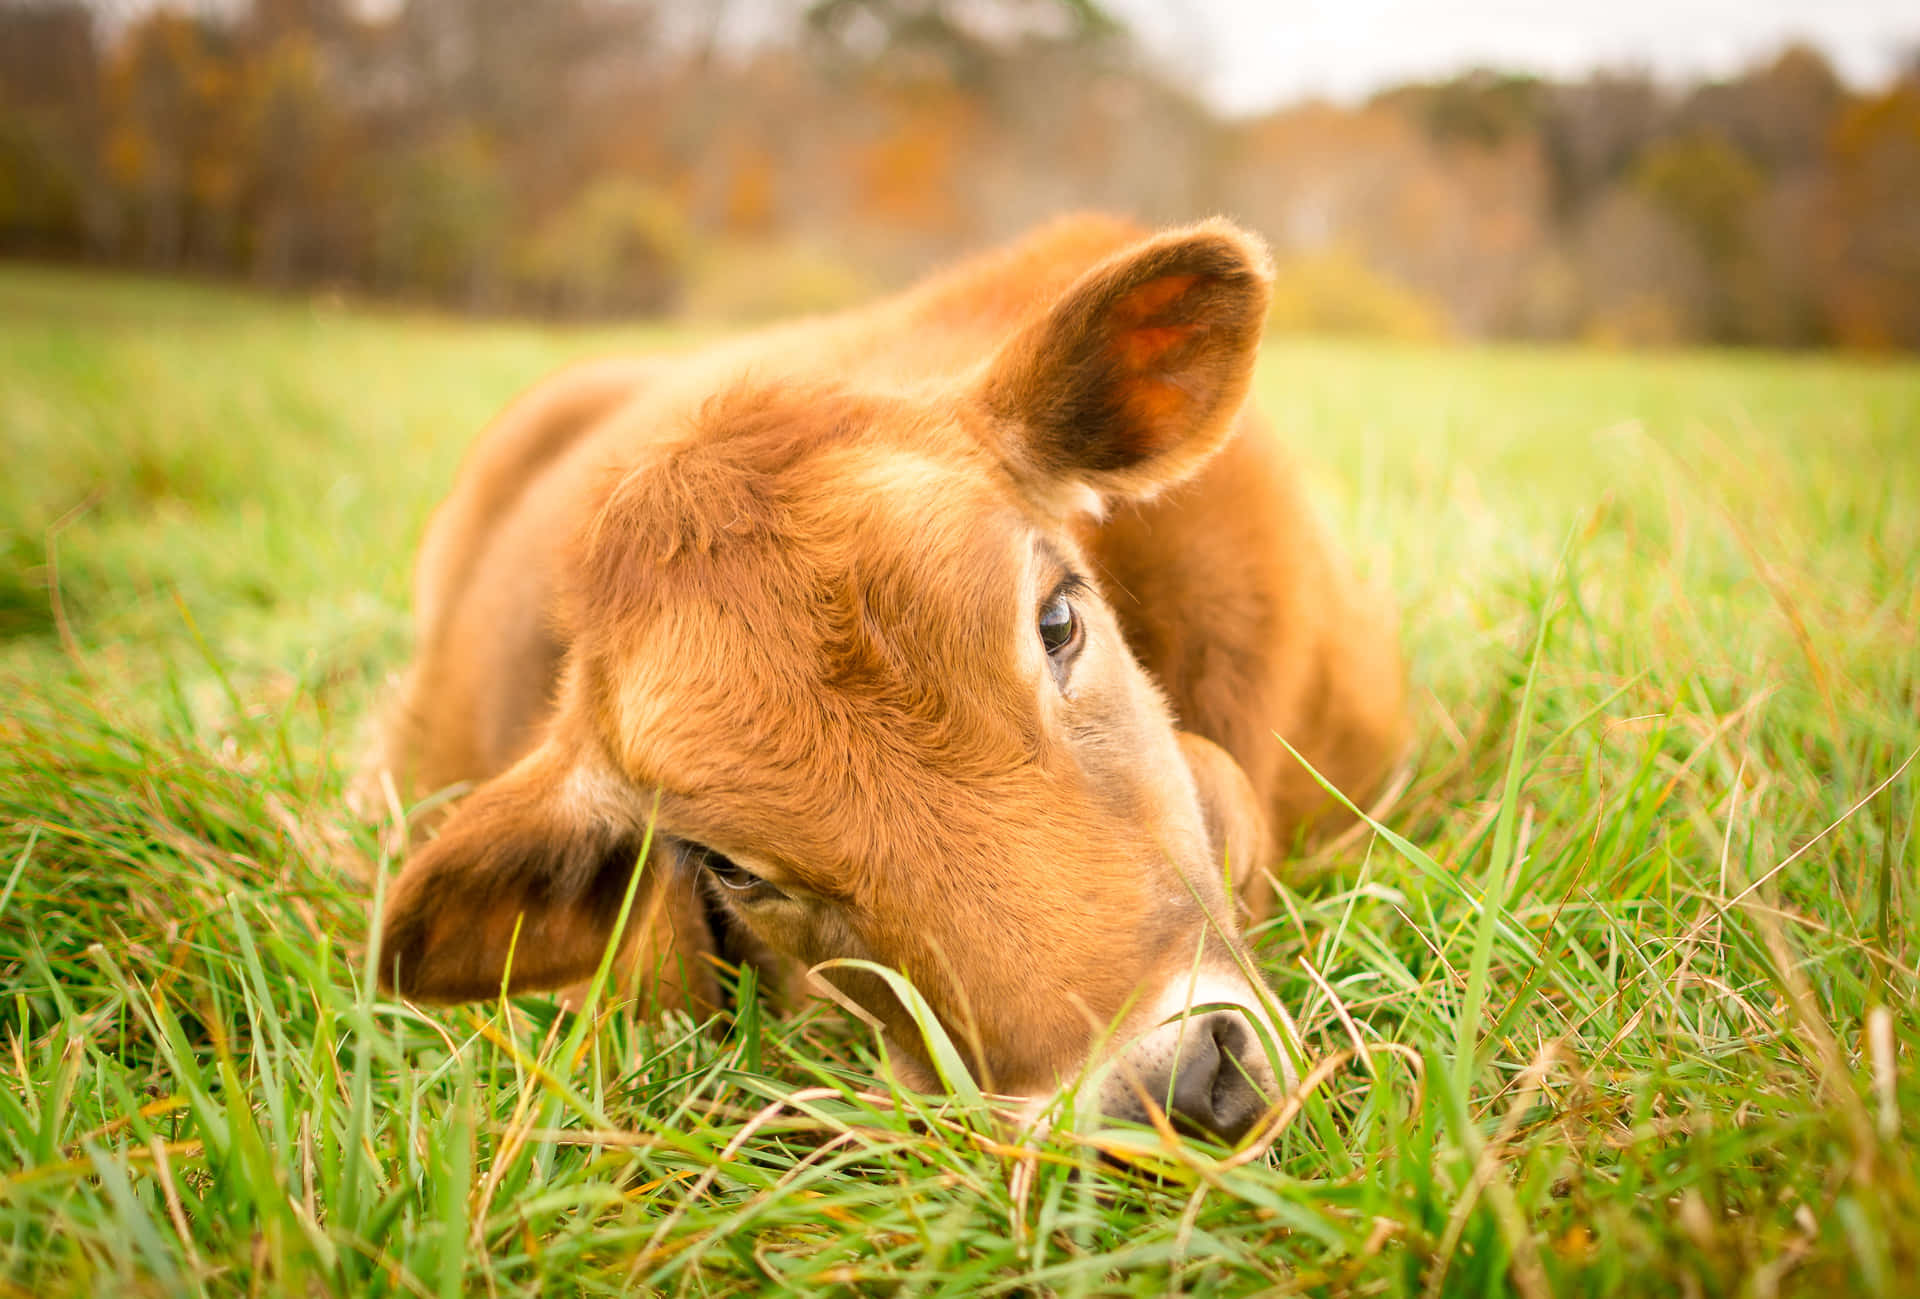 Cute grazing cow in the countryside